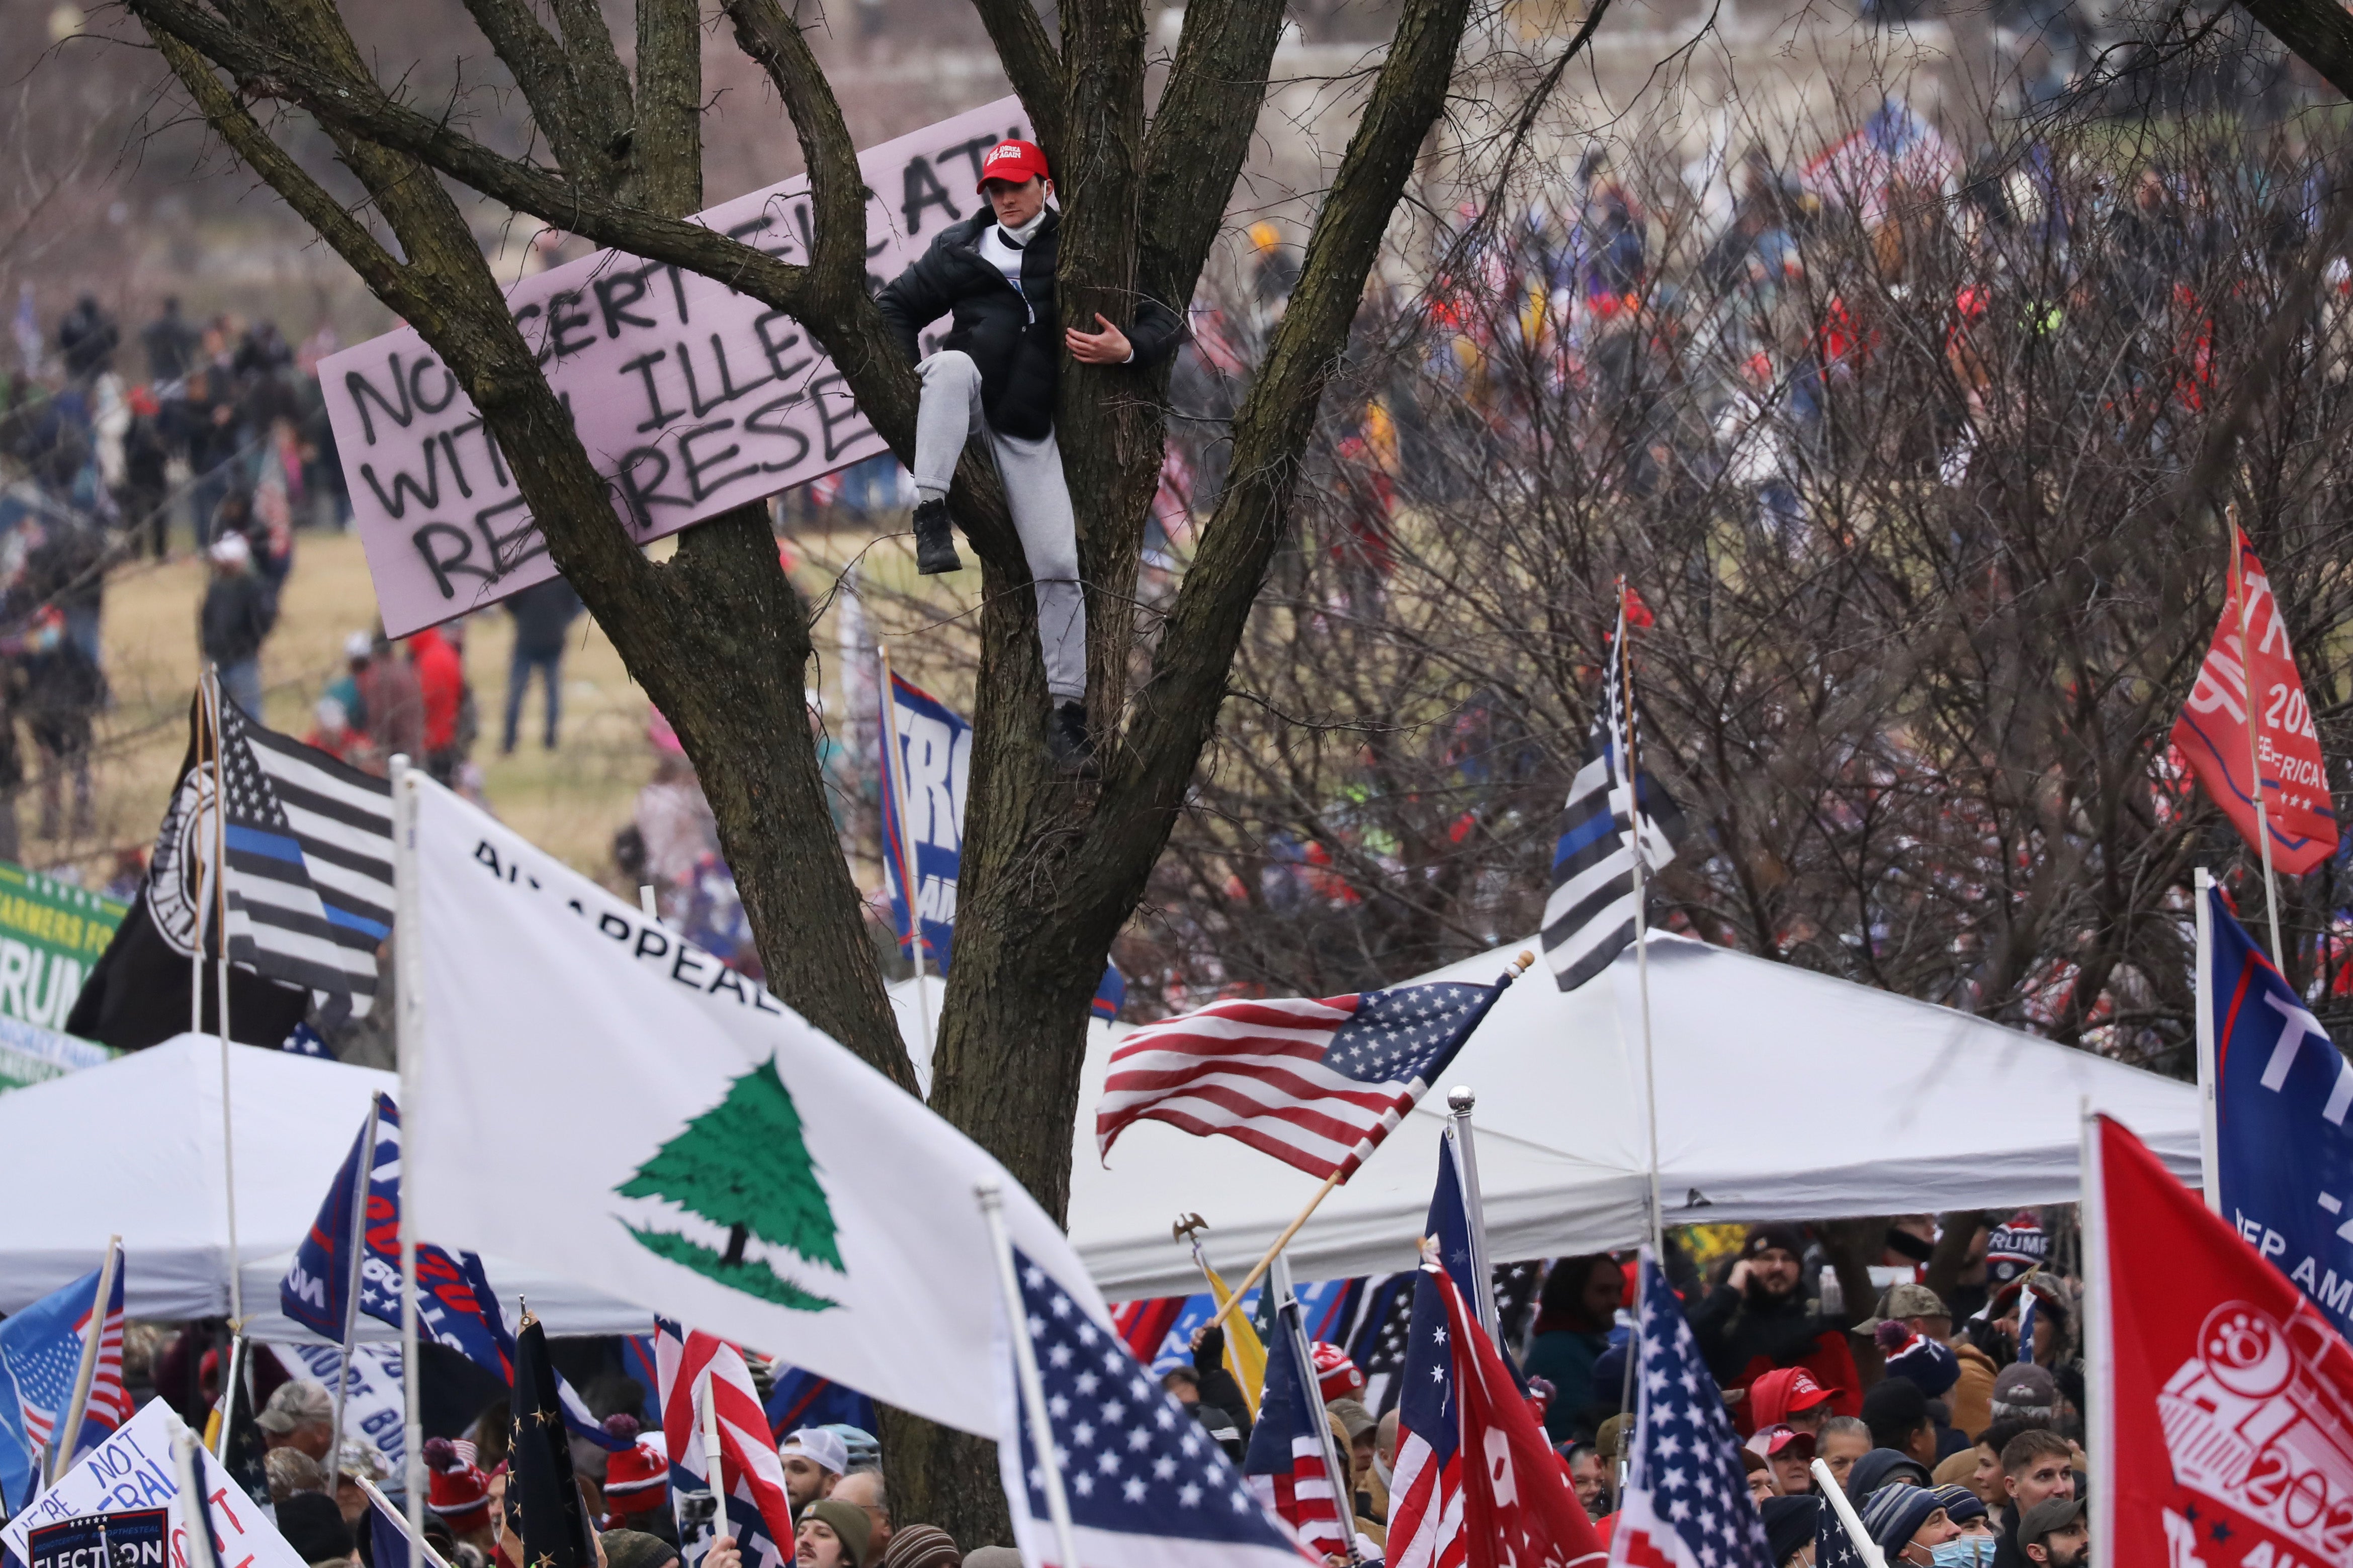 ‘An appeal to heaven’ flag is seen as crowds arrive for the ‘Stop the Steal' rally on January 6, 2021, in Washington, DC